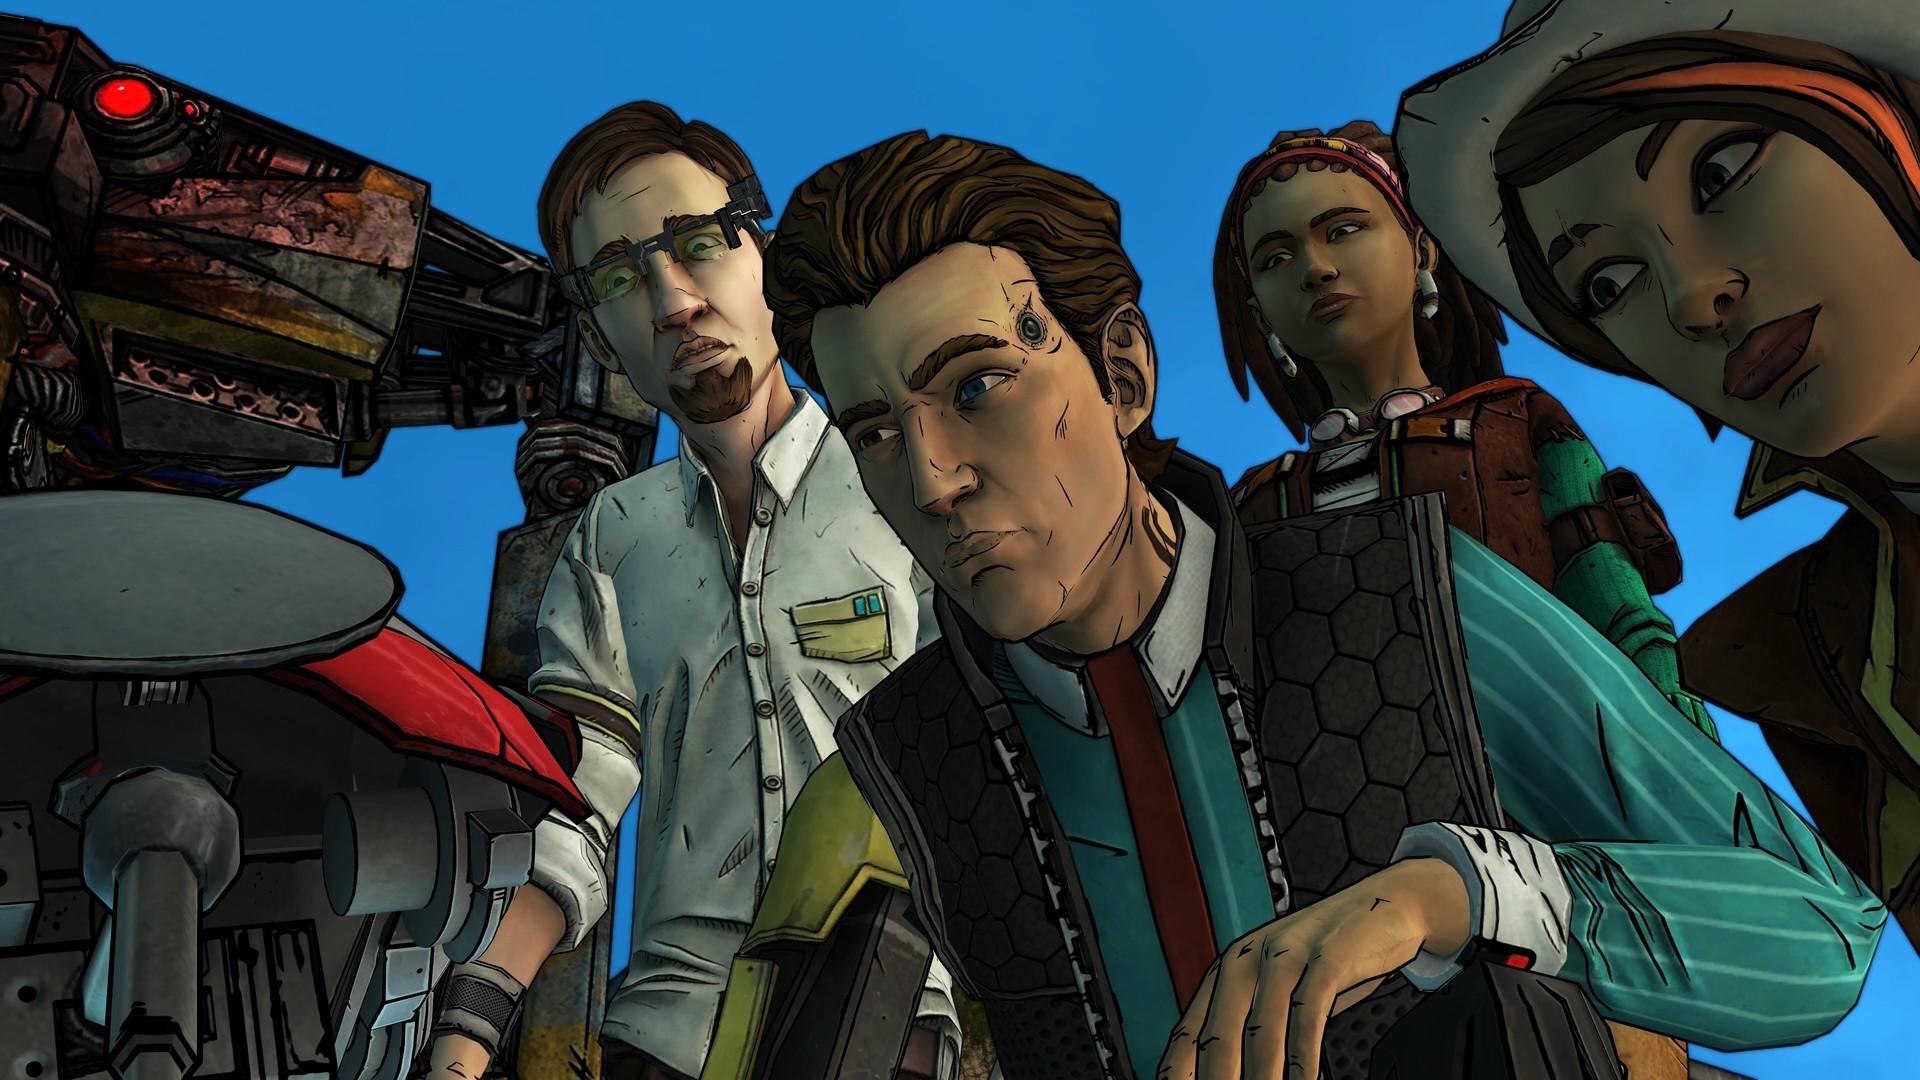 Screenshot 1 of Tales from the Borderlands 